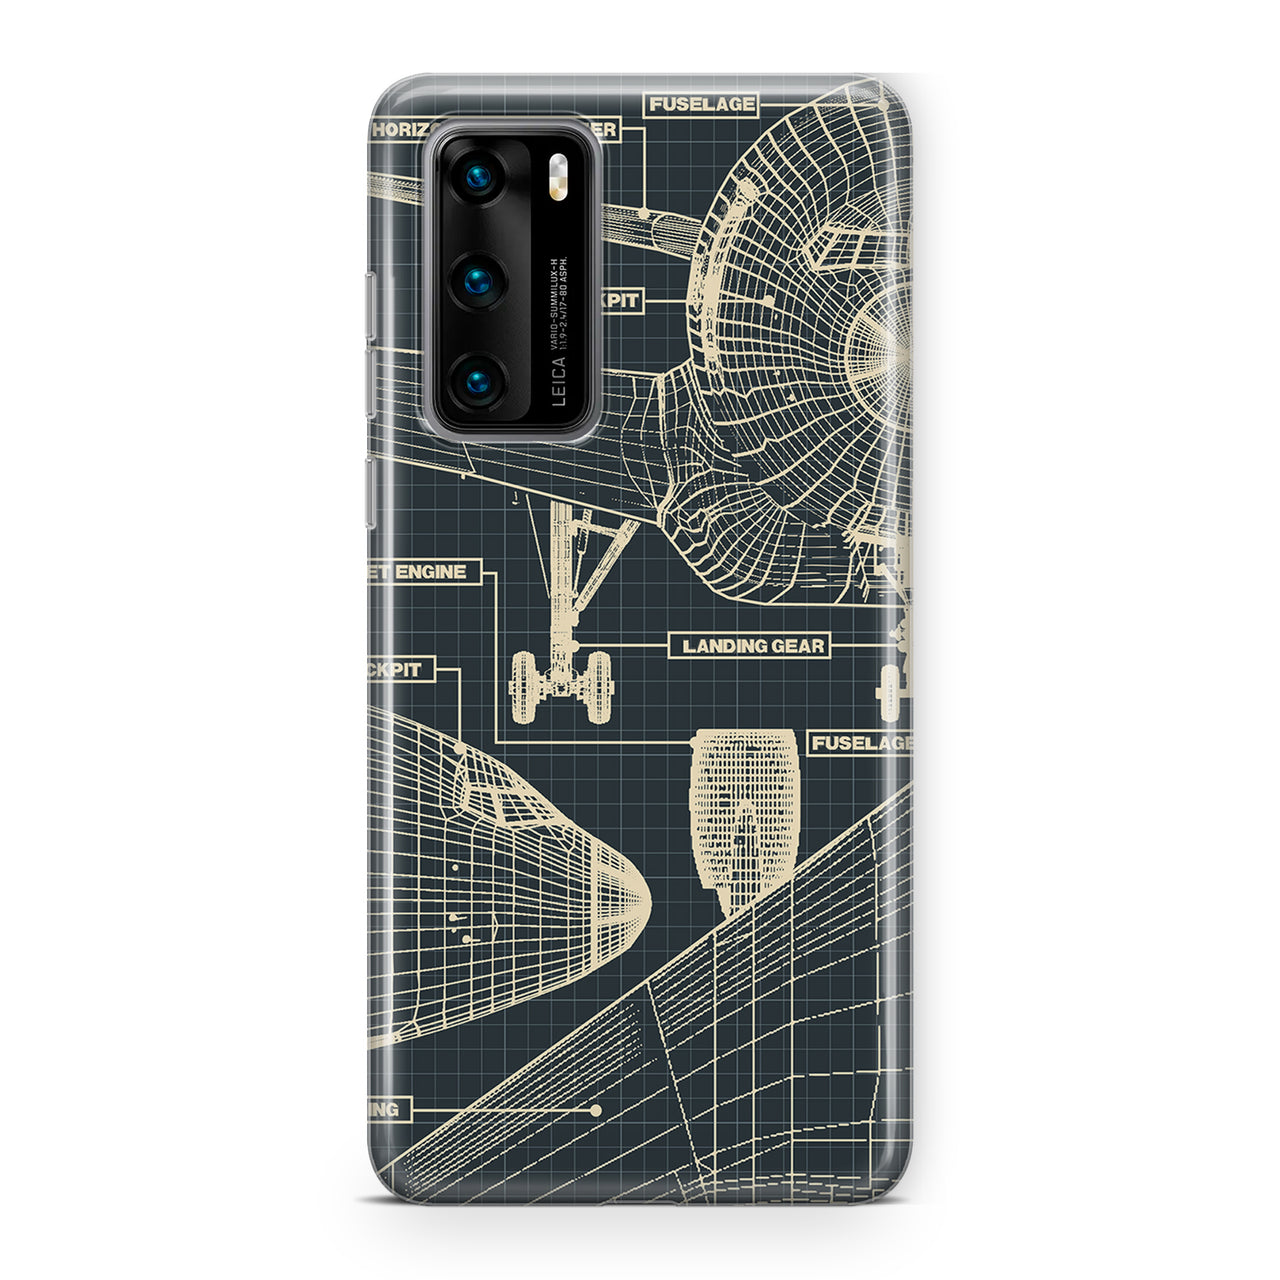 Airplanes Fuselage & Data Designed Huawei Cases